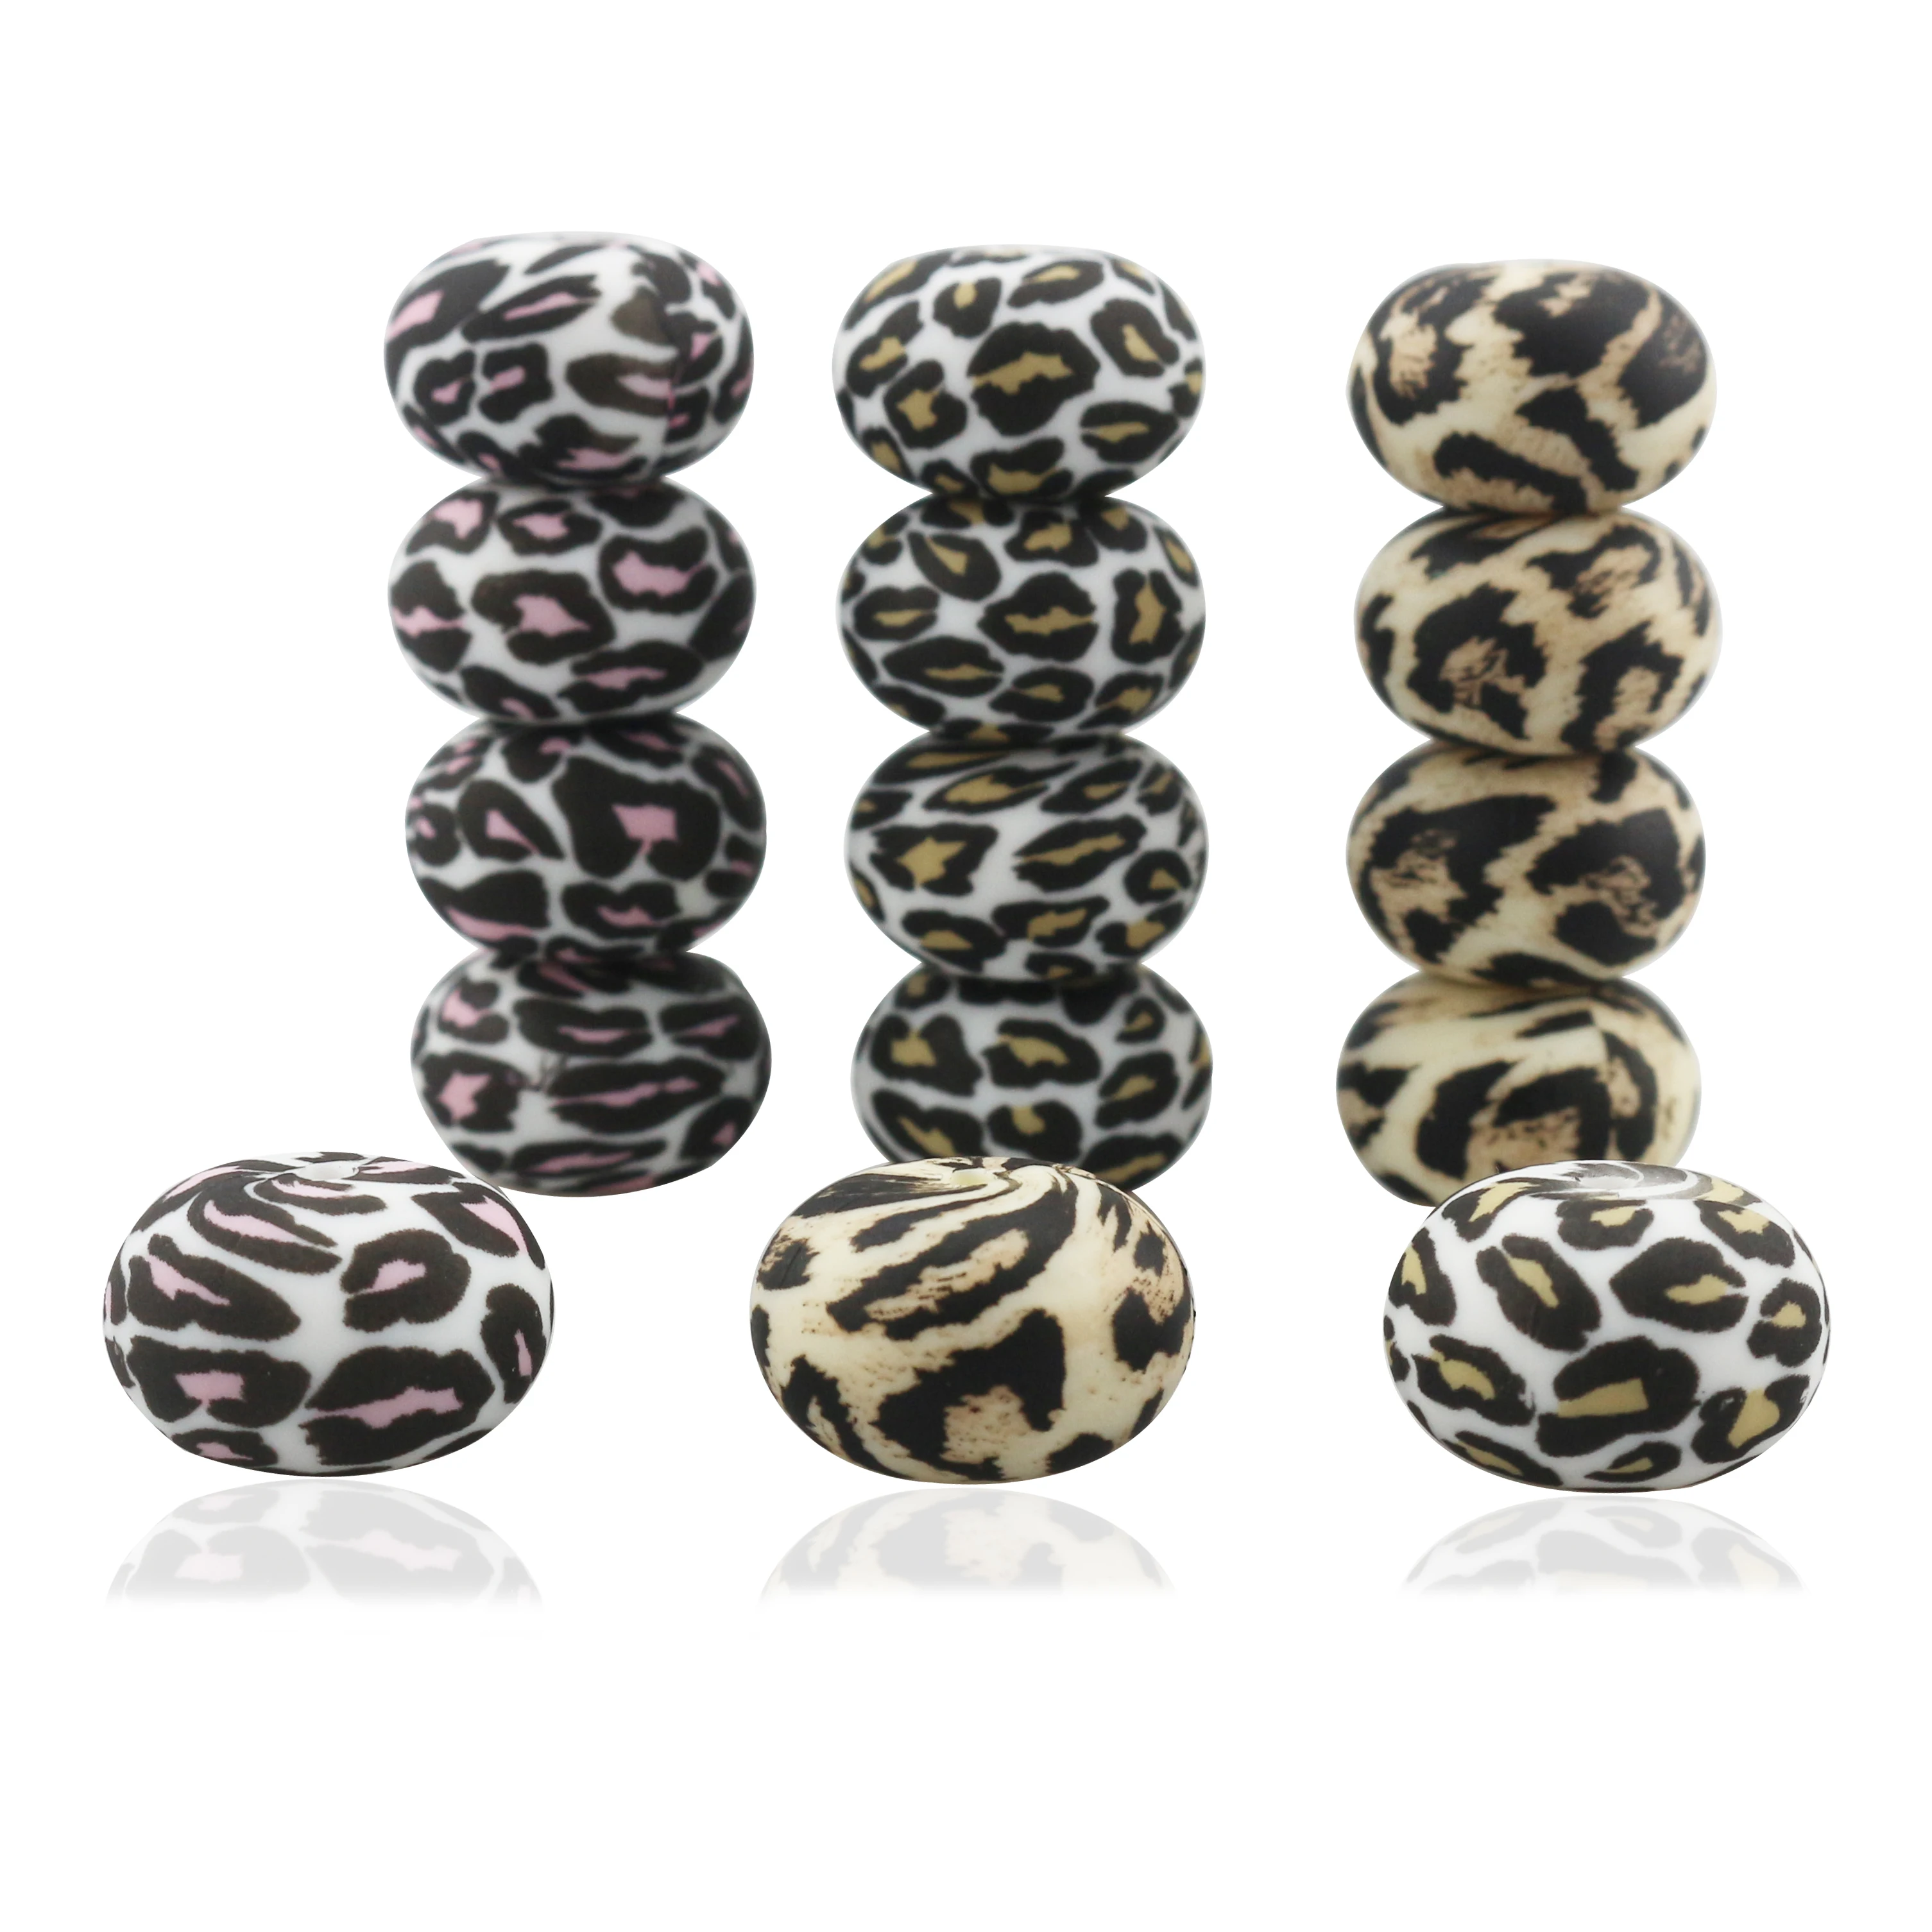 

Wholesale BPA FREE 20mm Leopard Print Abacus Silicone Baby Teething Beads For Jewelry Lanyard Keychain Soft Silicone Chew Bead, 33 colors, customed